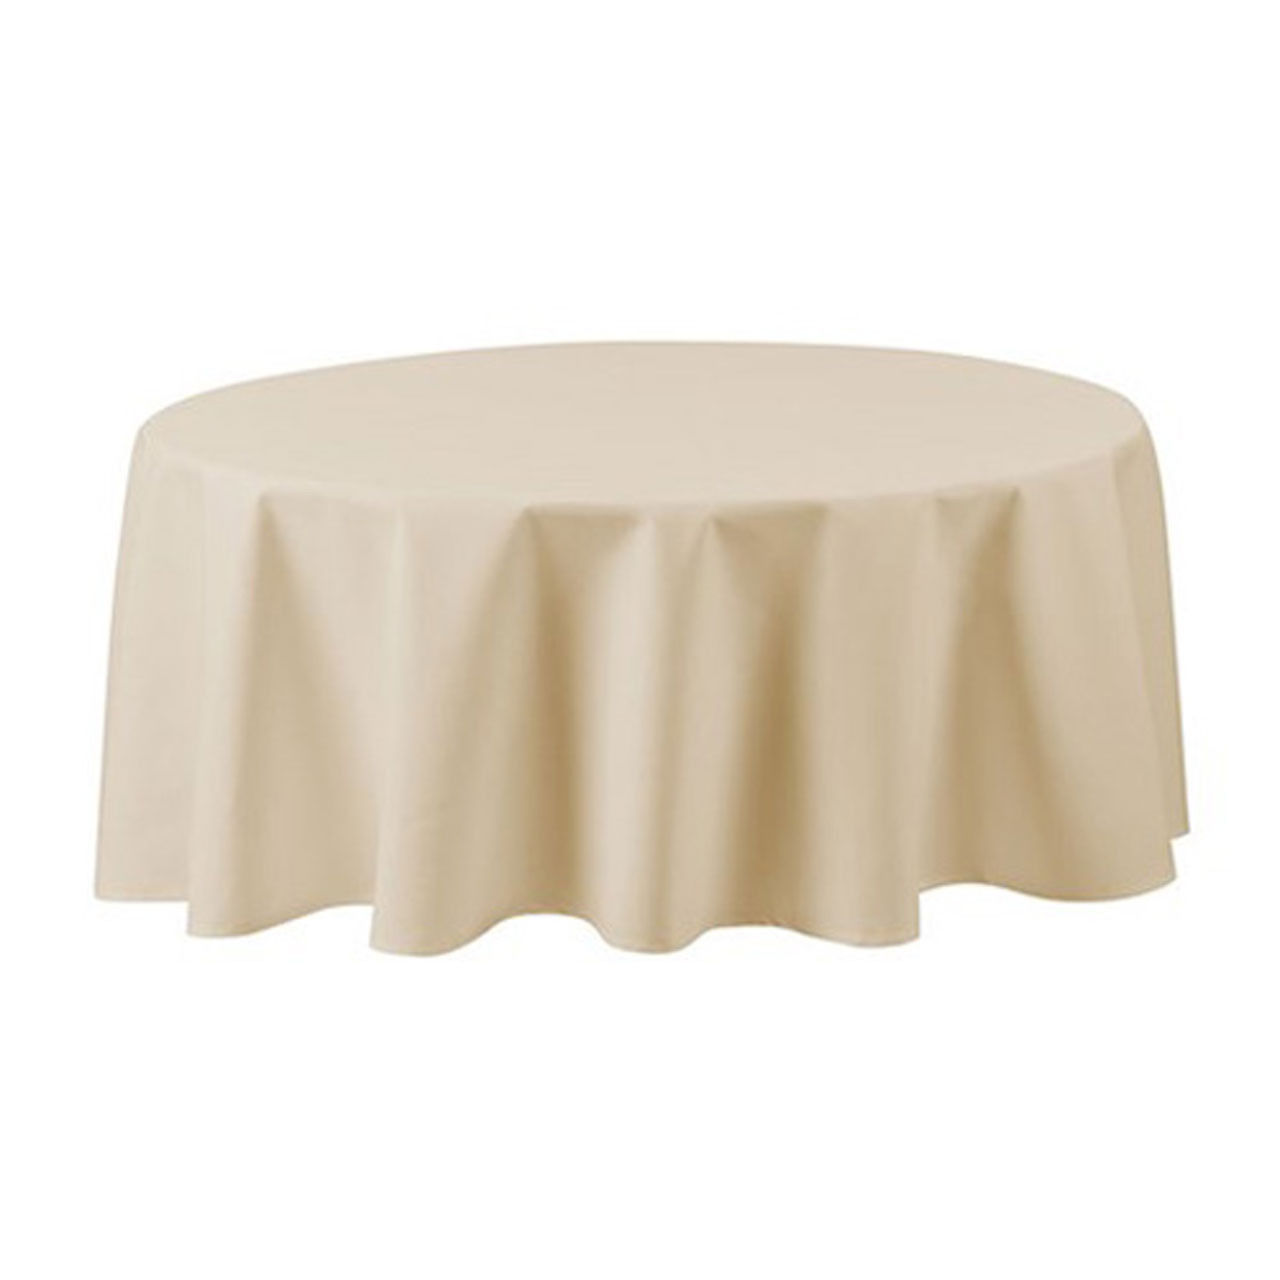 Is the ivory 120 inch round tablecloth made of linen?